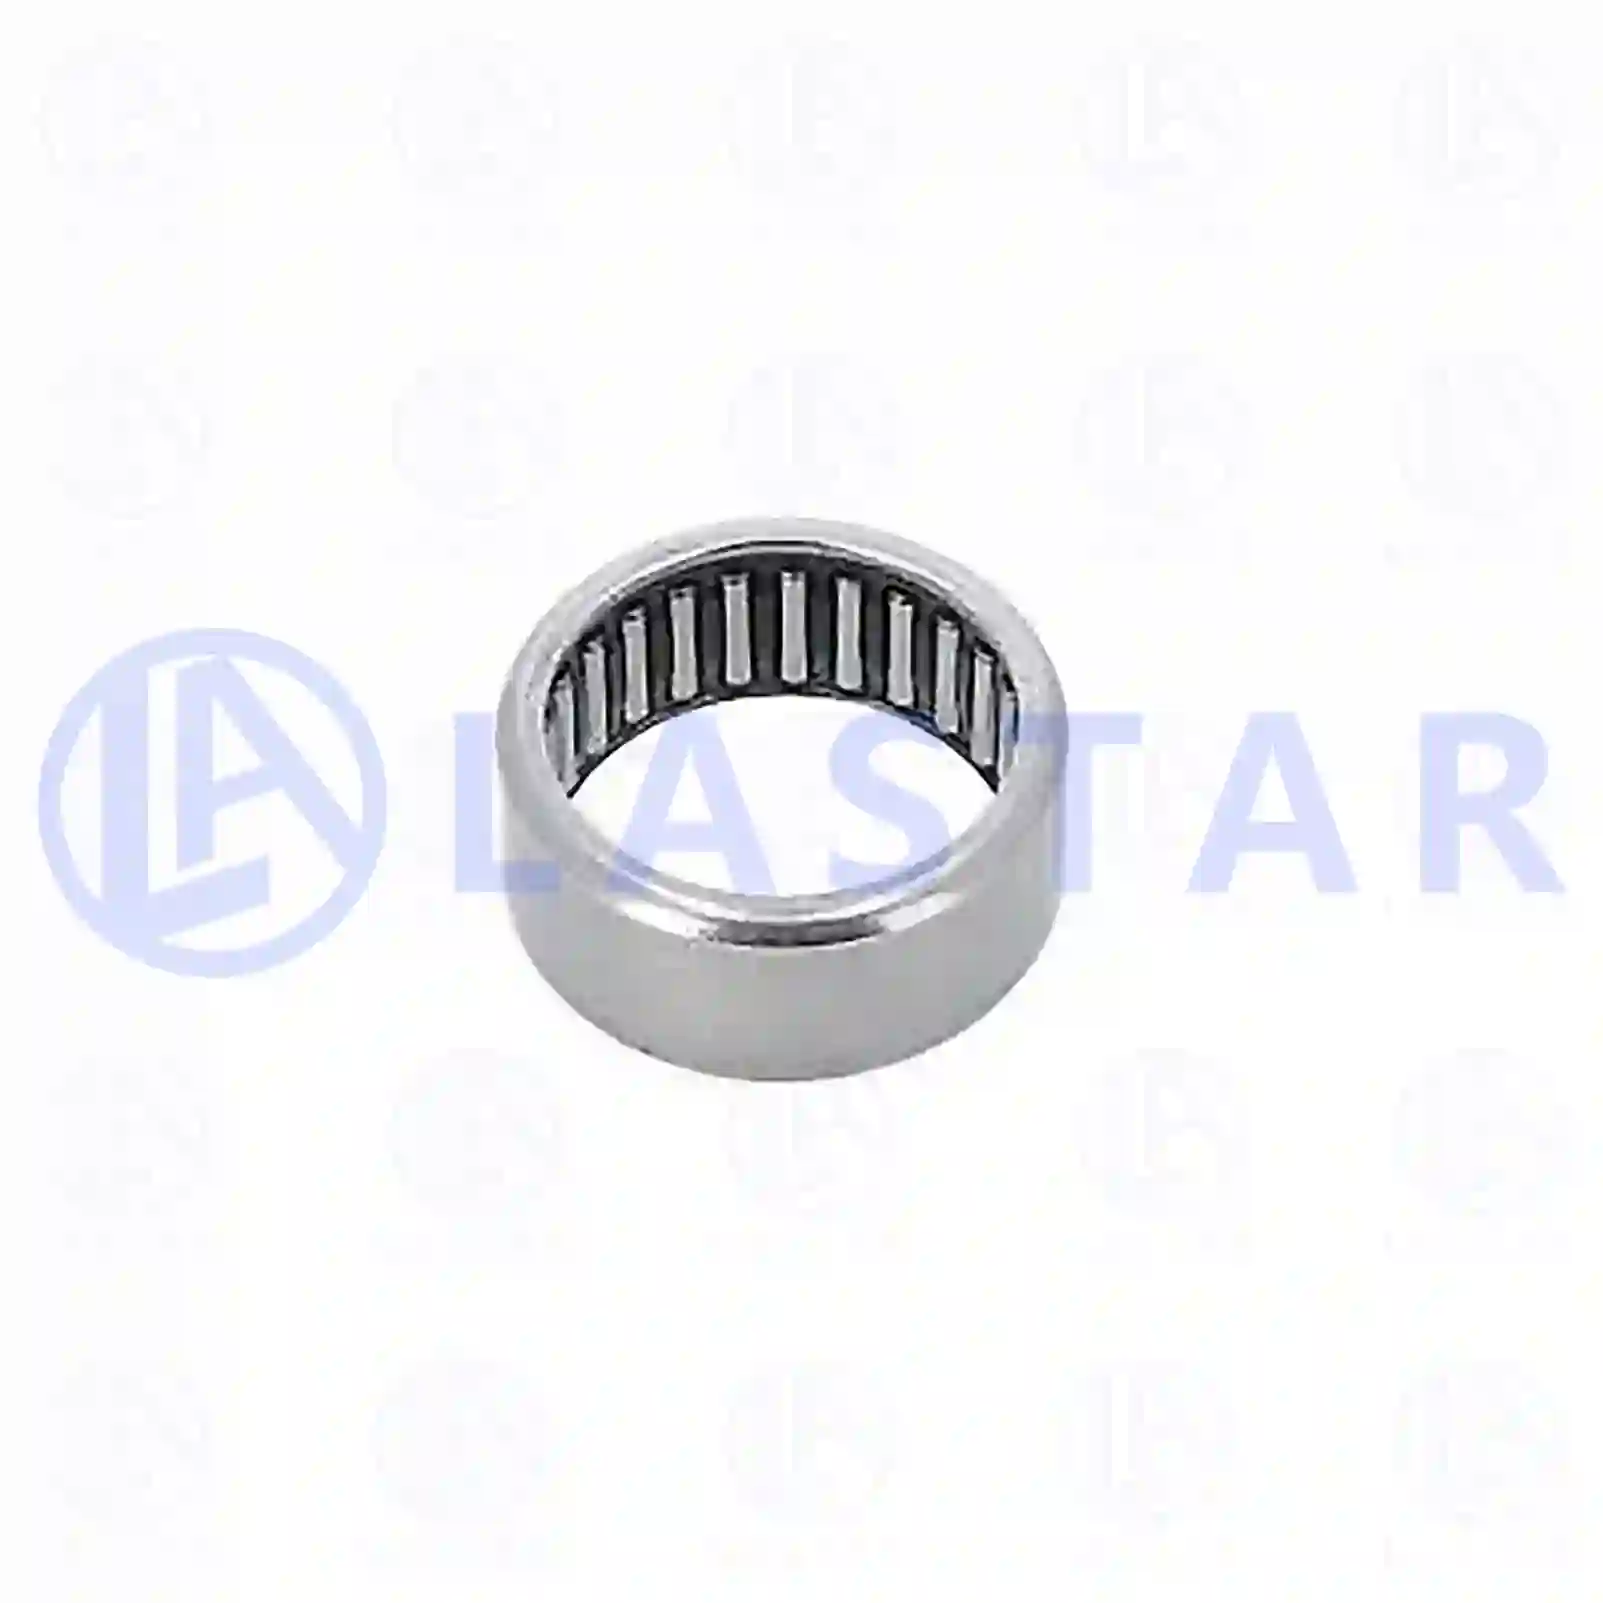  Needle bearing || Lastar Spare Part | Truck Spare Parts, Auotomotive Spare Parts